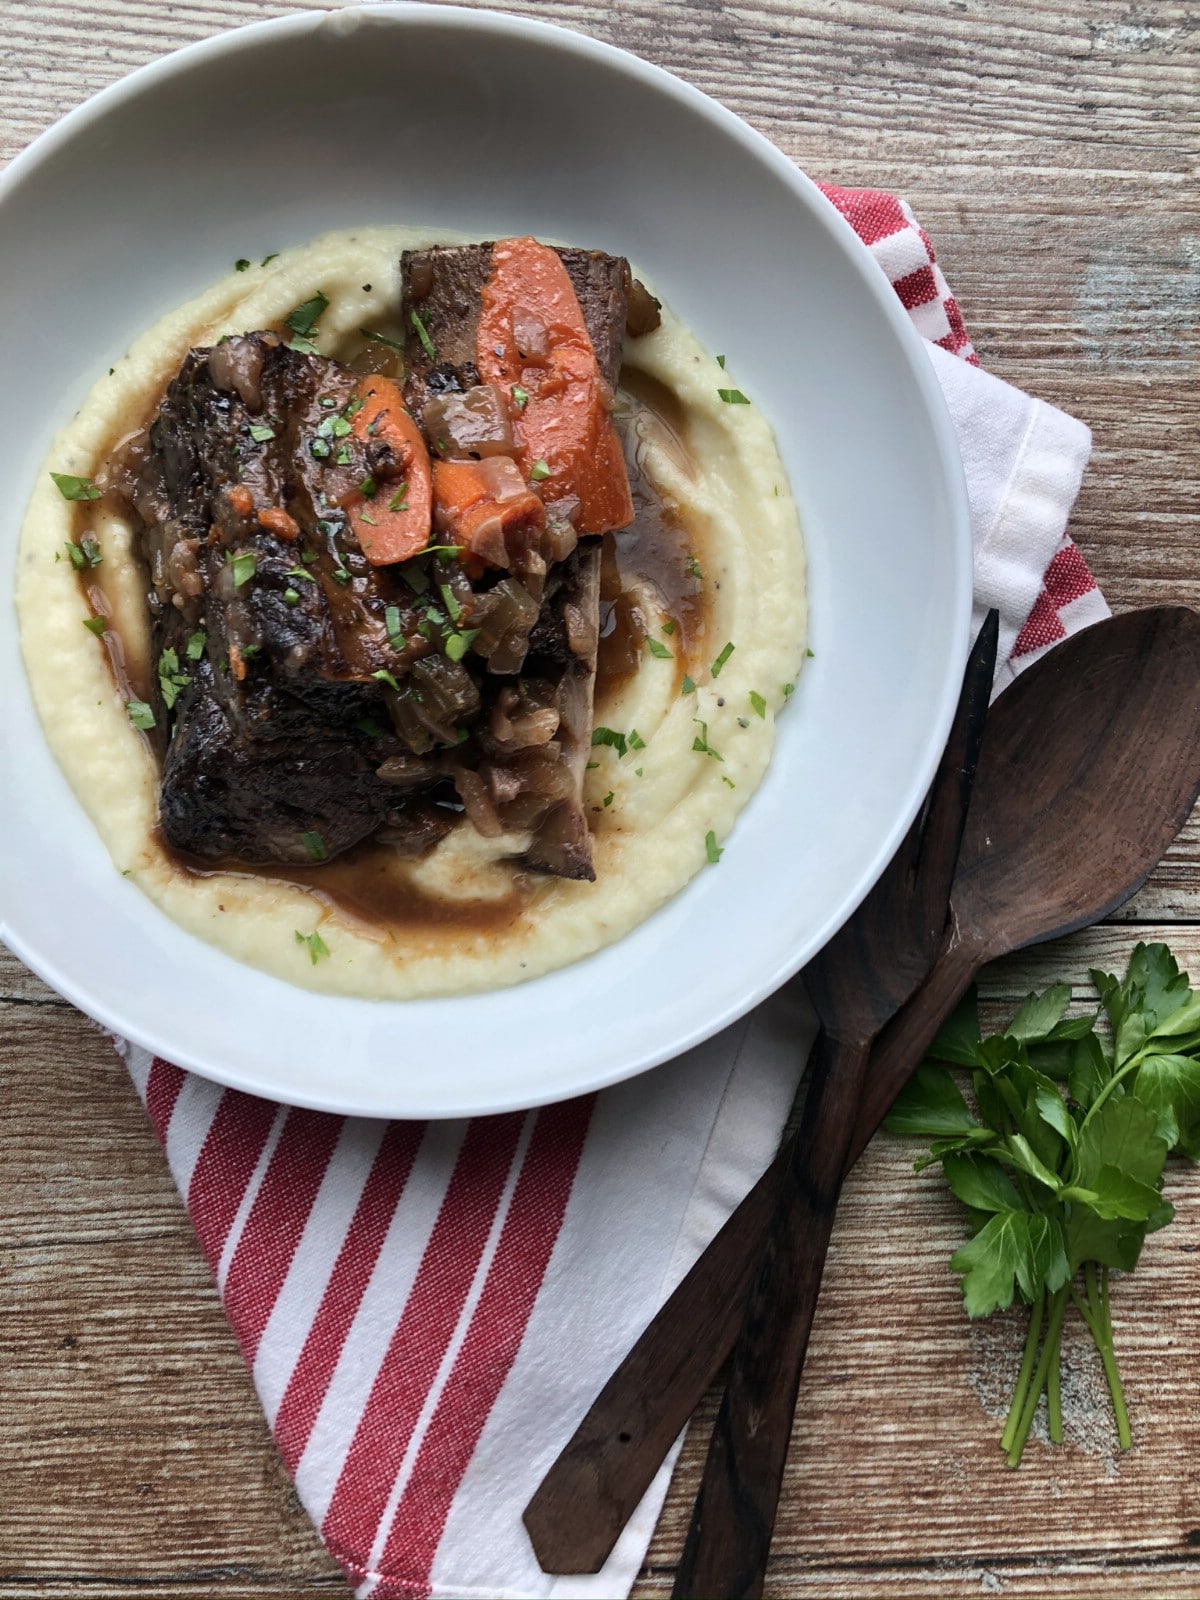 Braised short ribs on parsnip puree in white bowl